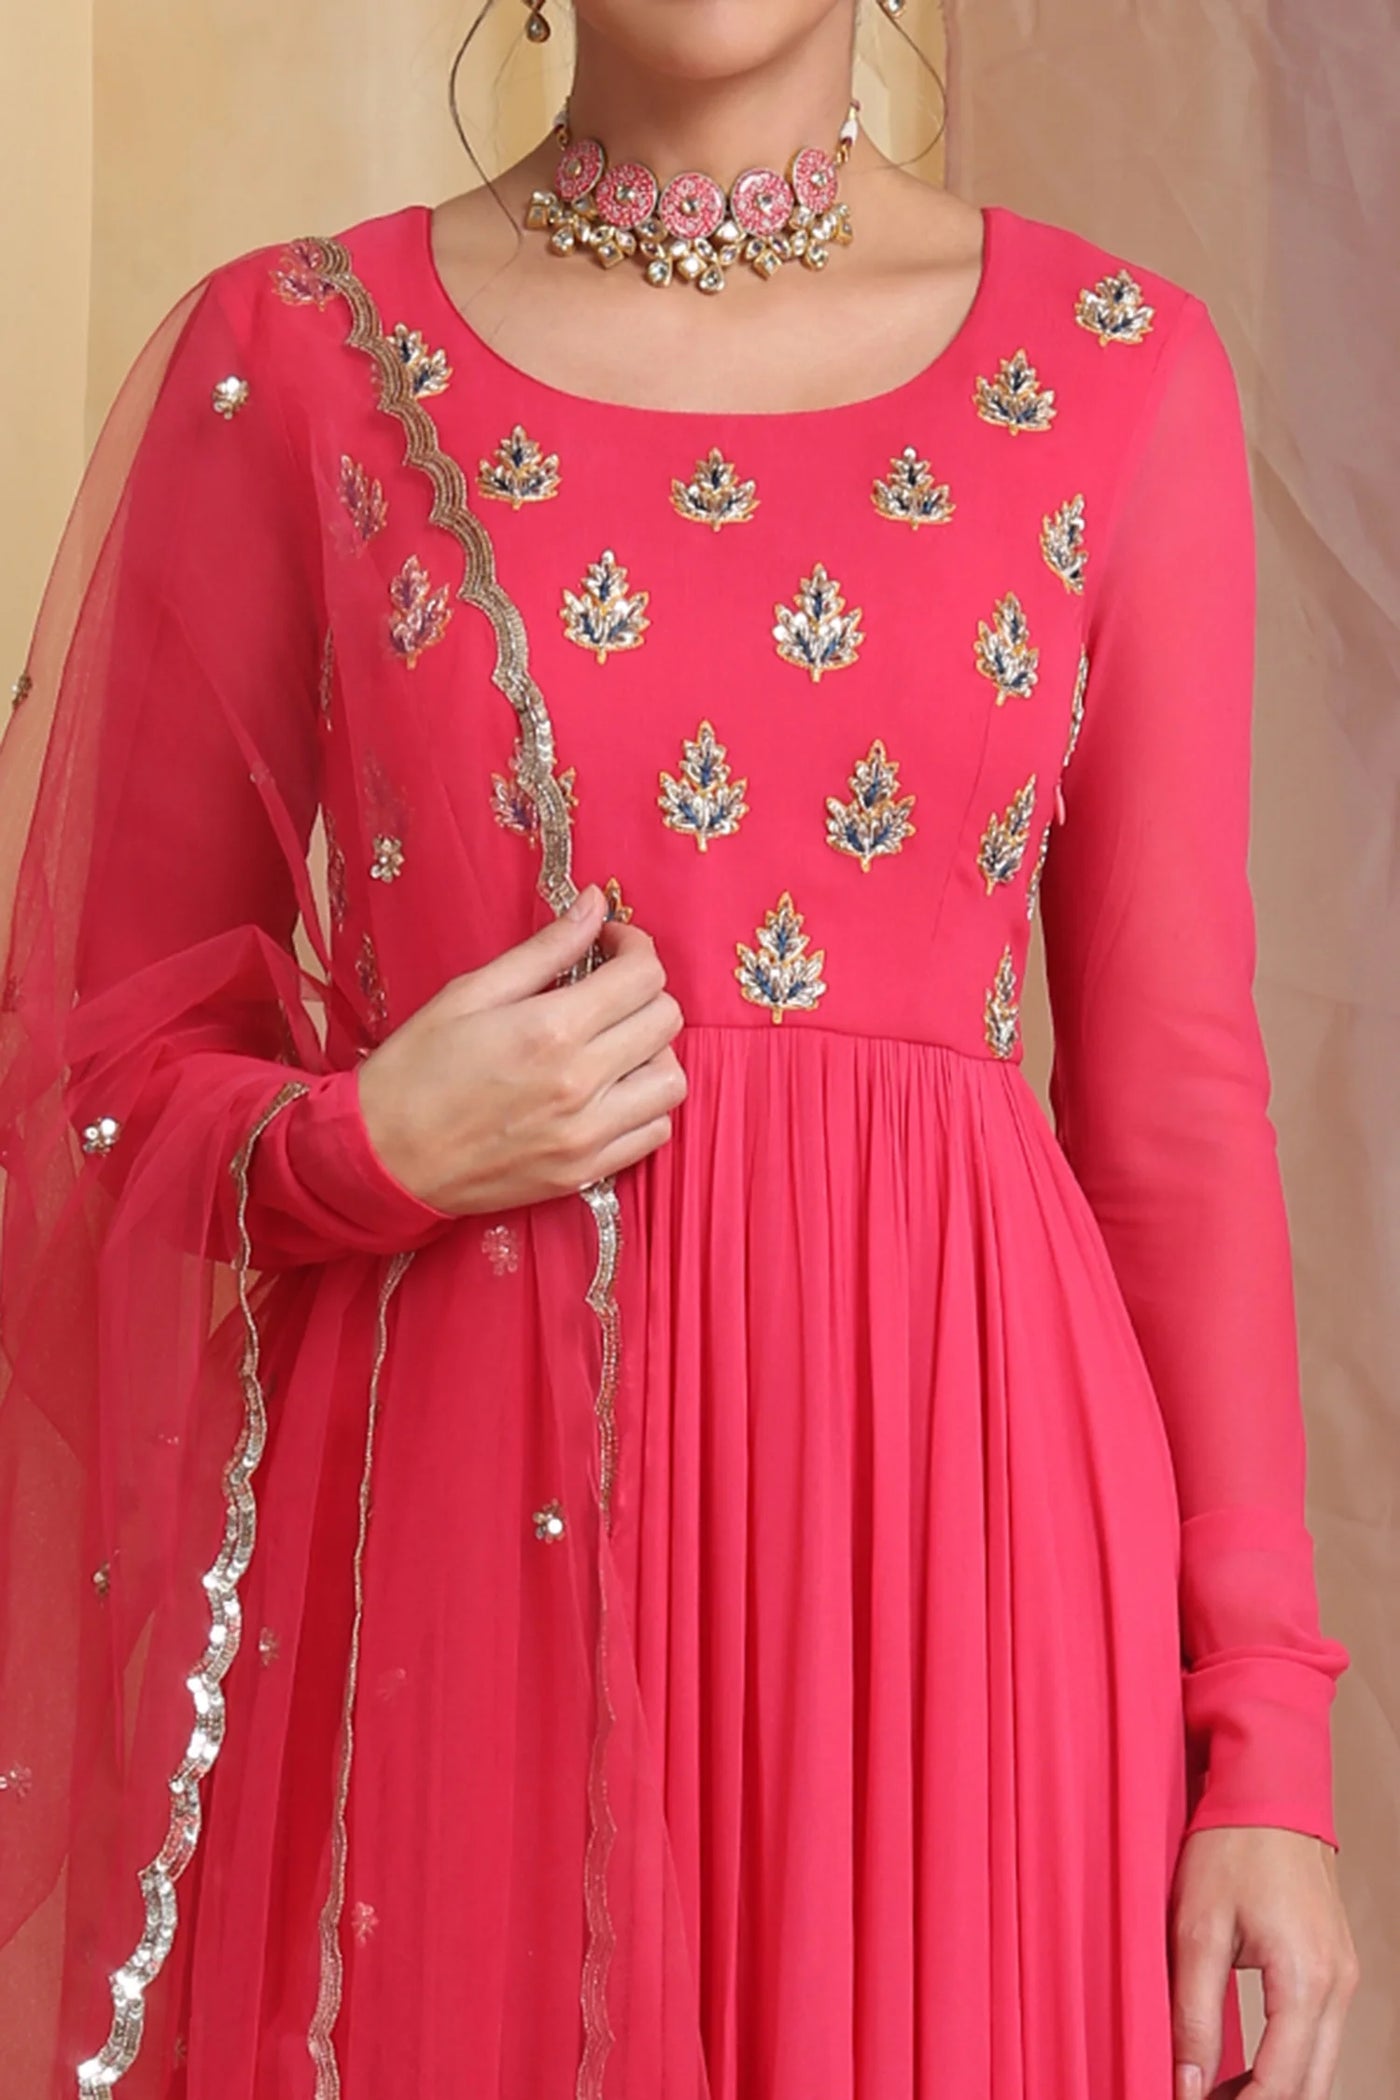 Cherry Red Embroidered Anarkali Indian Clothing in Denver, CO, Aurora, CO, Boulder, CO, Fort Collins, CO, Colorado Springs, CO, Parker, CO, Highlands Ranch, CO, Cherry Creek, CO, Centennial, CO, and Longmont, CO. NATIONWIDE SHIPPING USA- India Fashion X